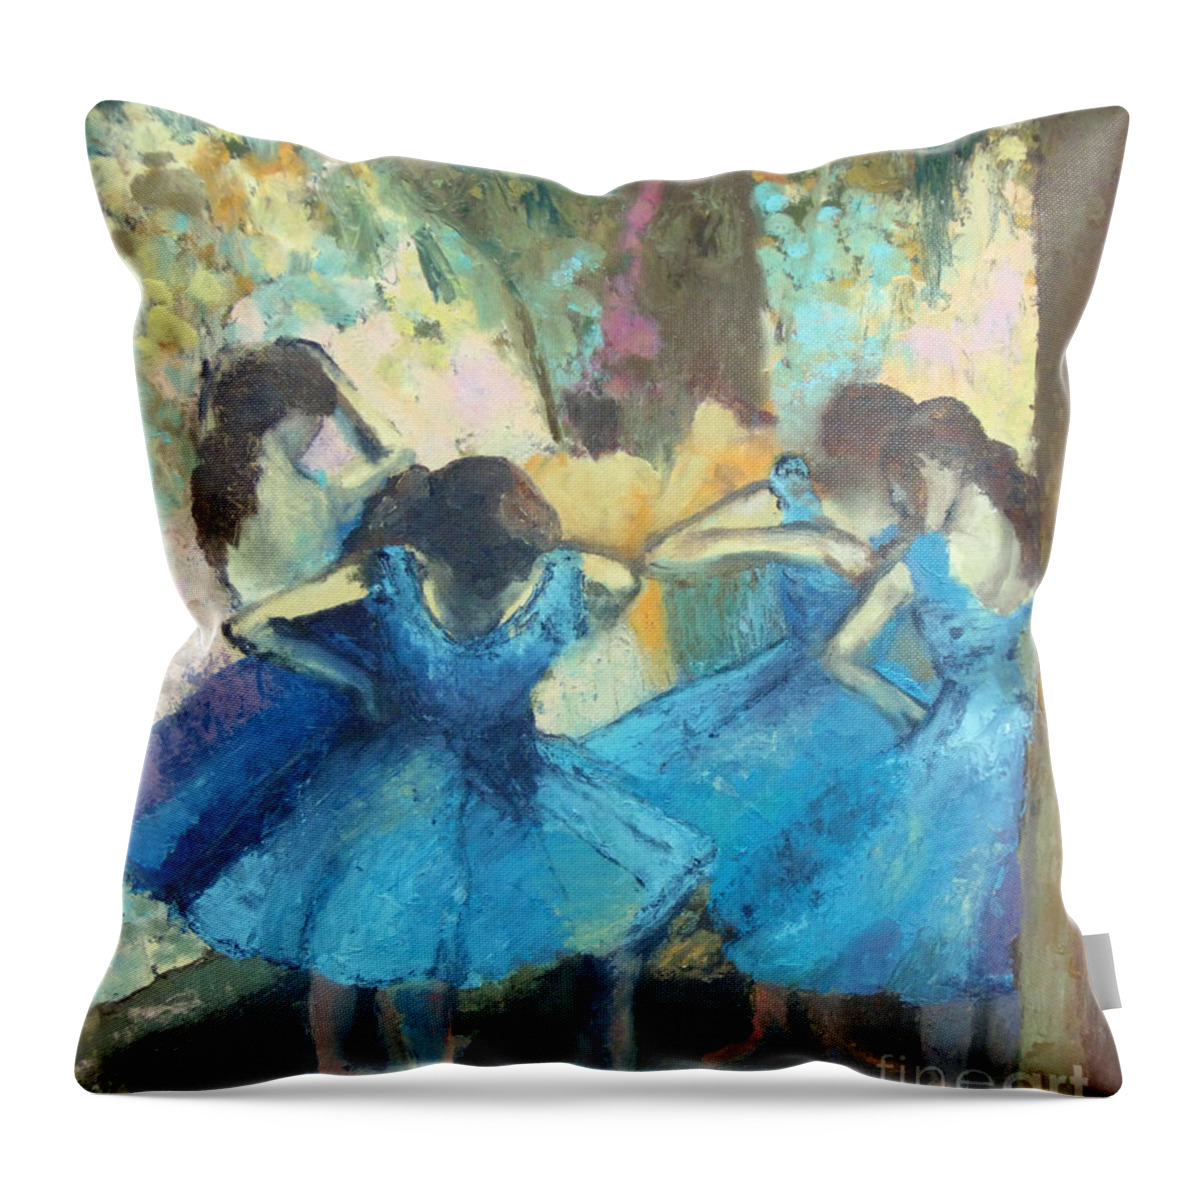 Edgar Degas Throw Pillow featuring the painting Dancers in Blue by MotionAge Designs